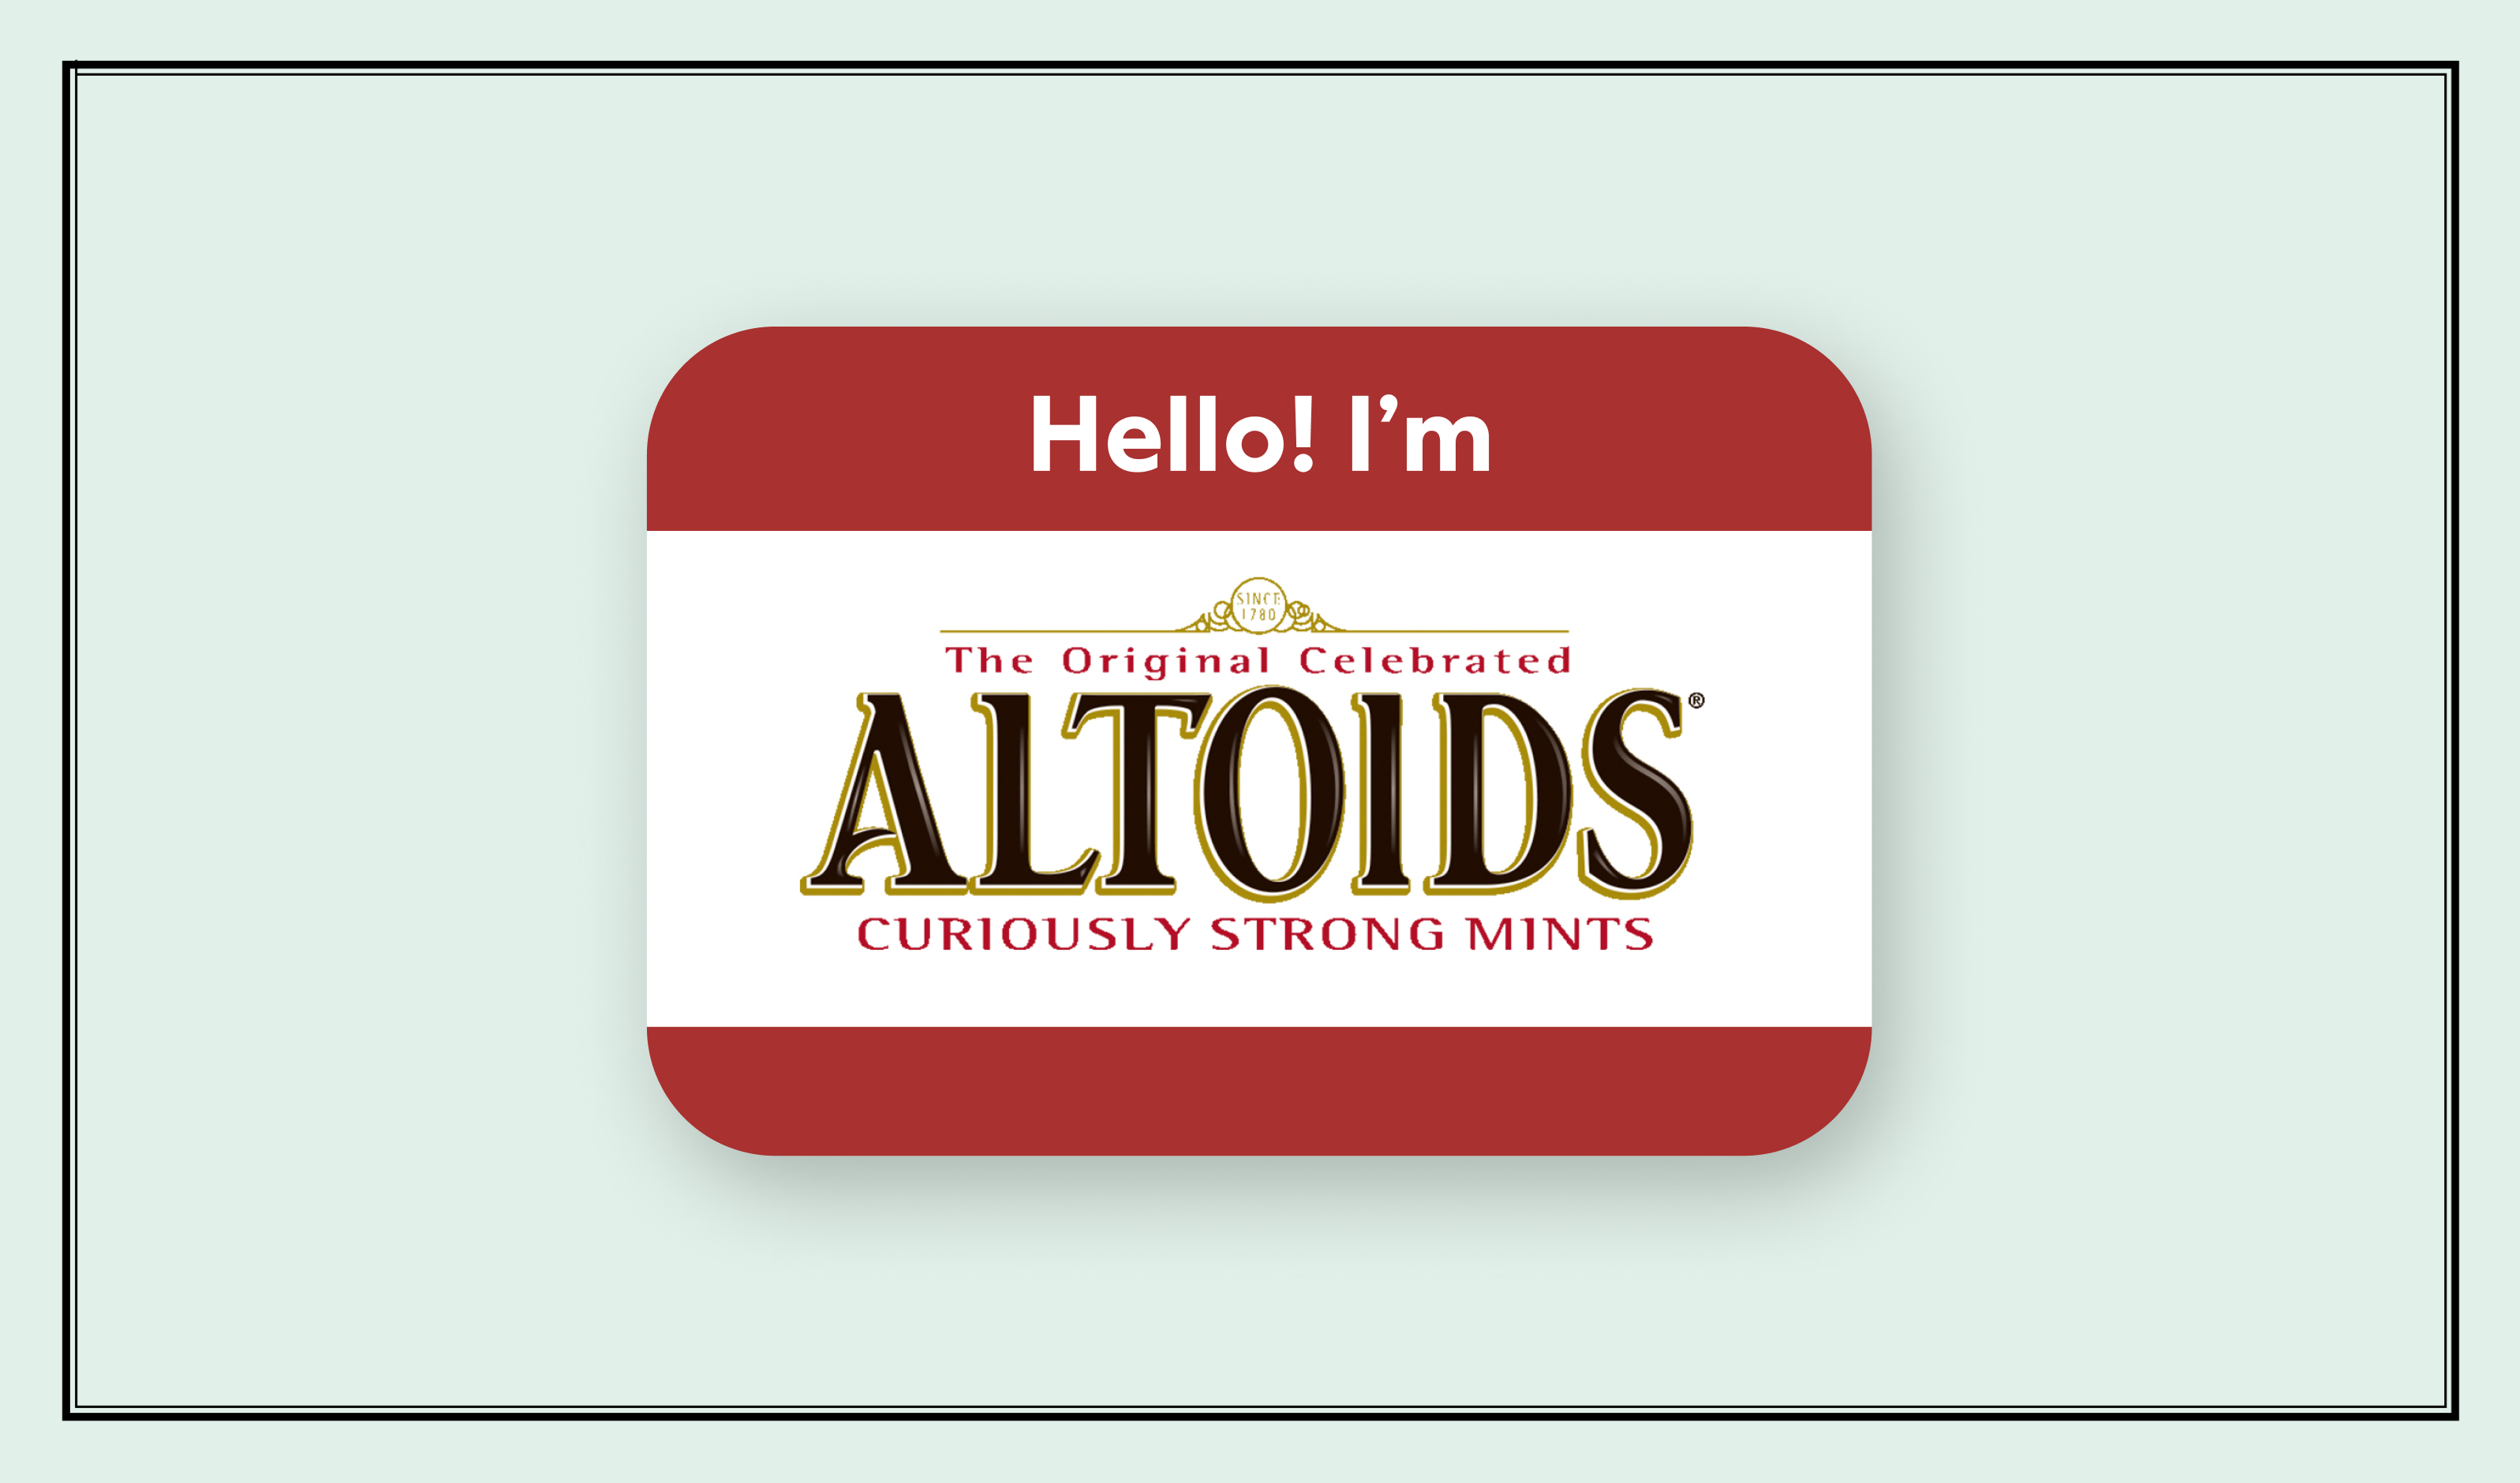 Altoids logo on a name tag on a mint green background